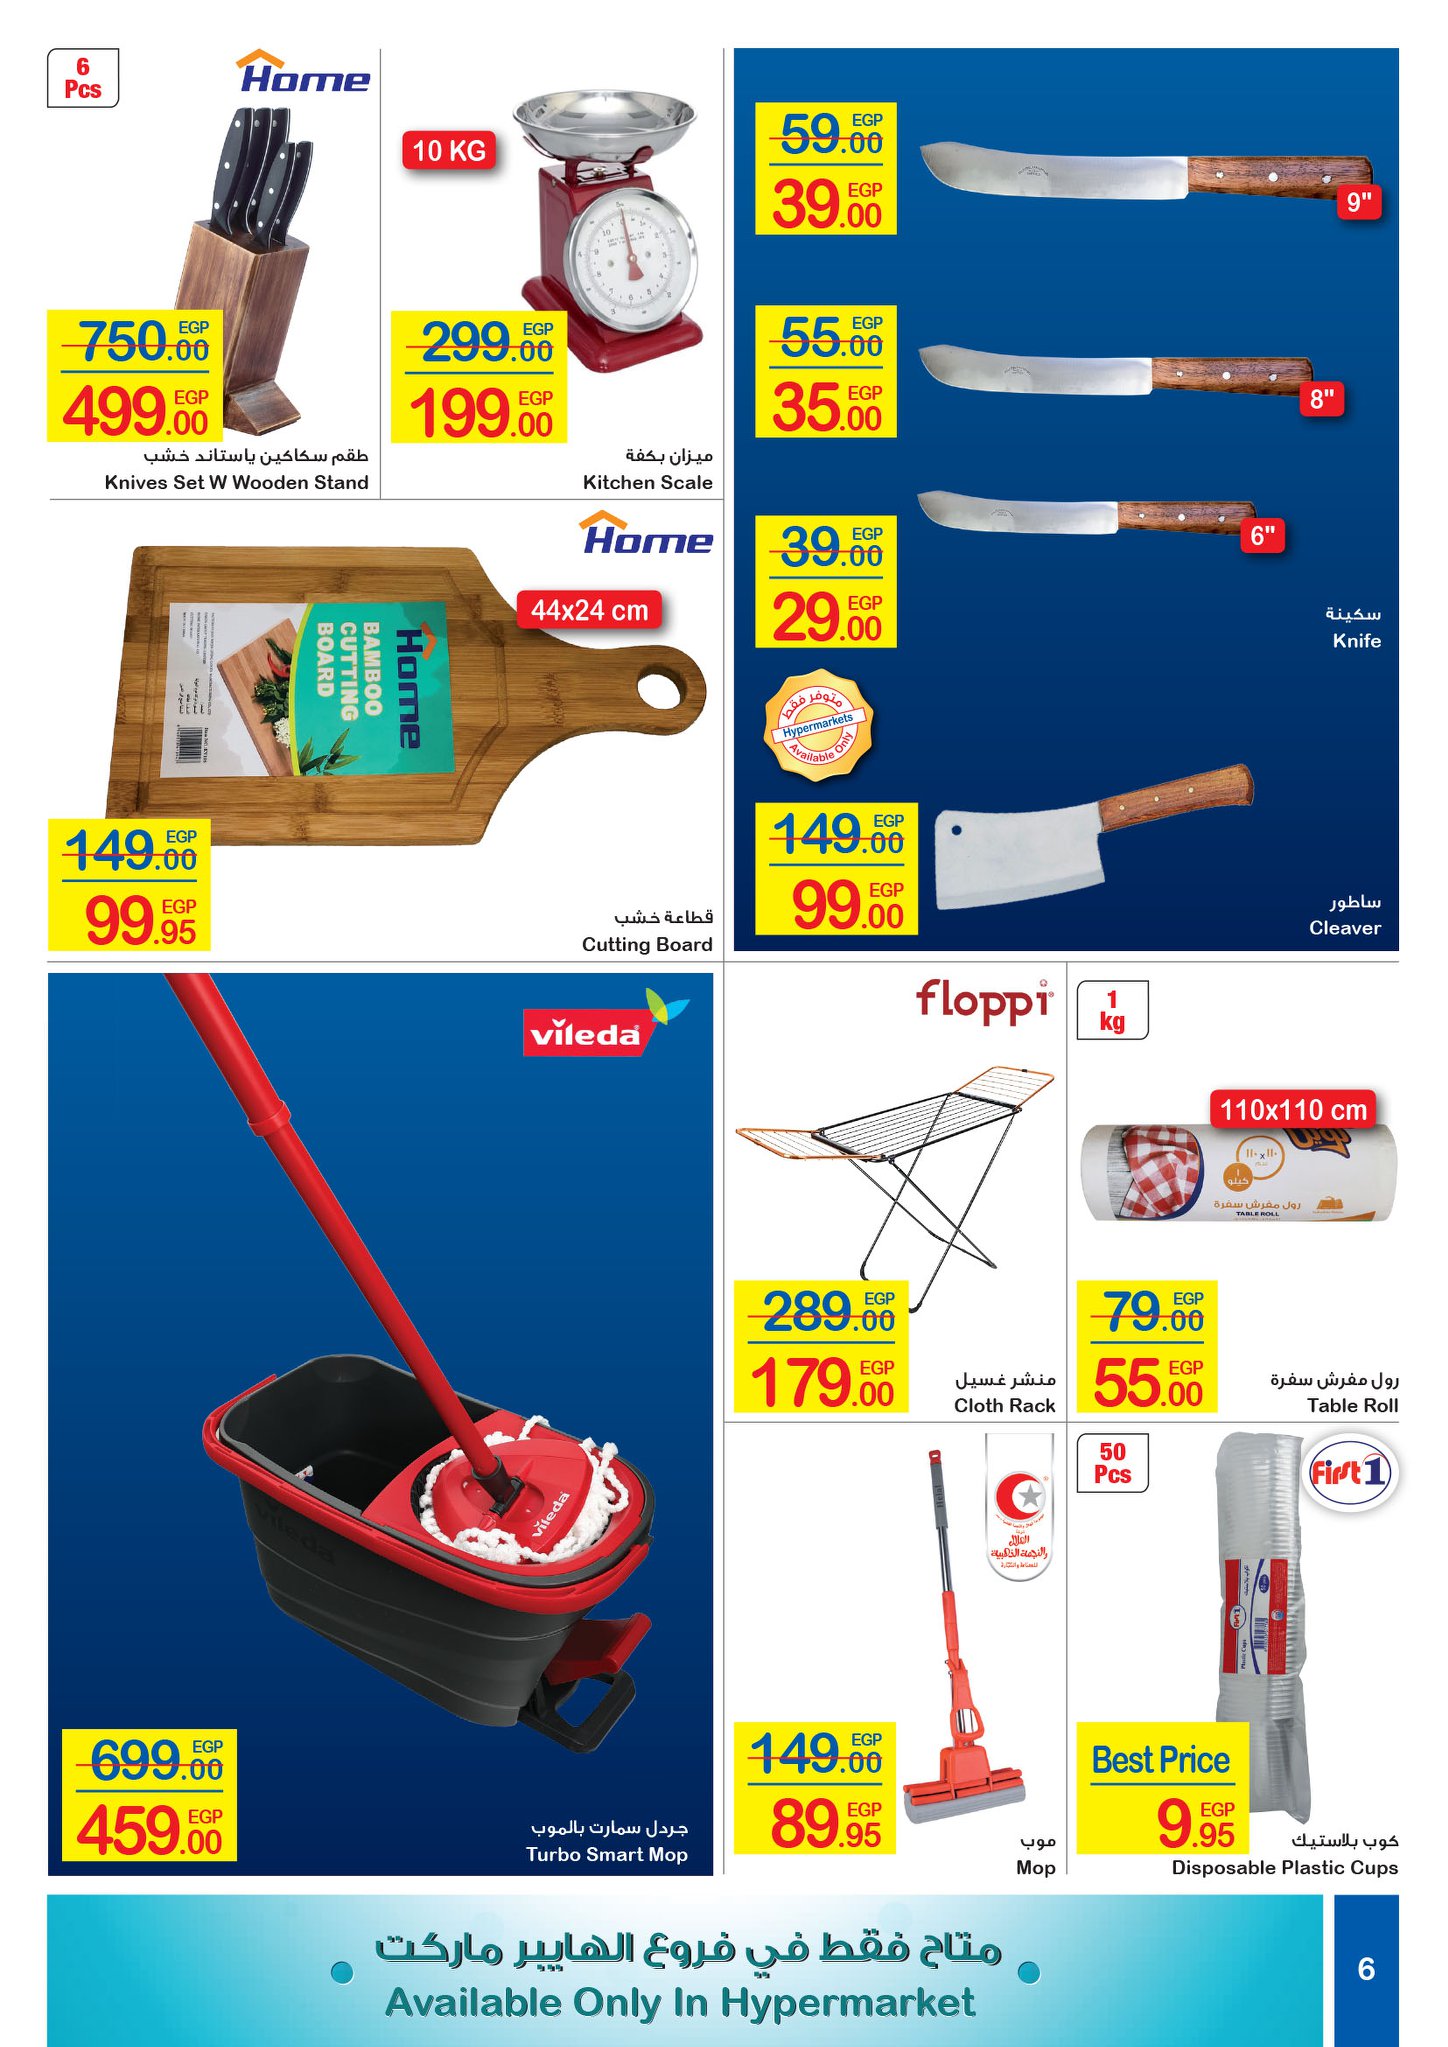 Carrefour Flyer from 16/7 till 27/7 | Carrefour Egypt 55